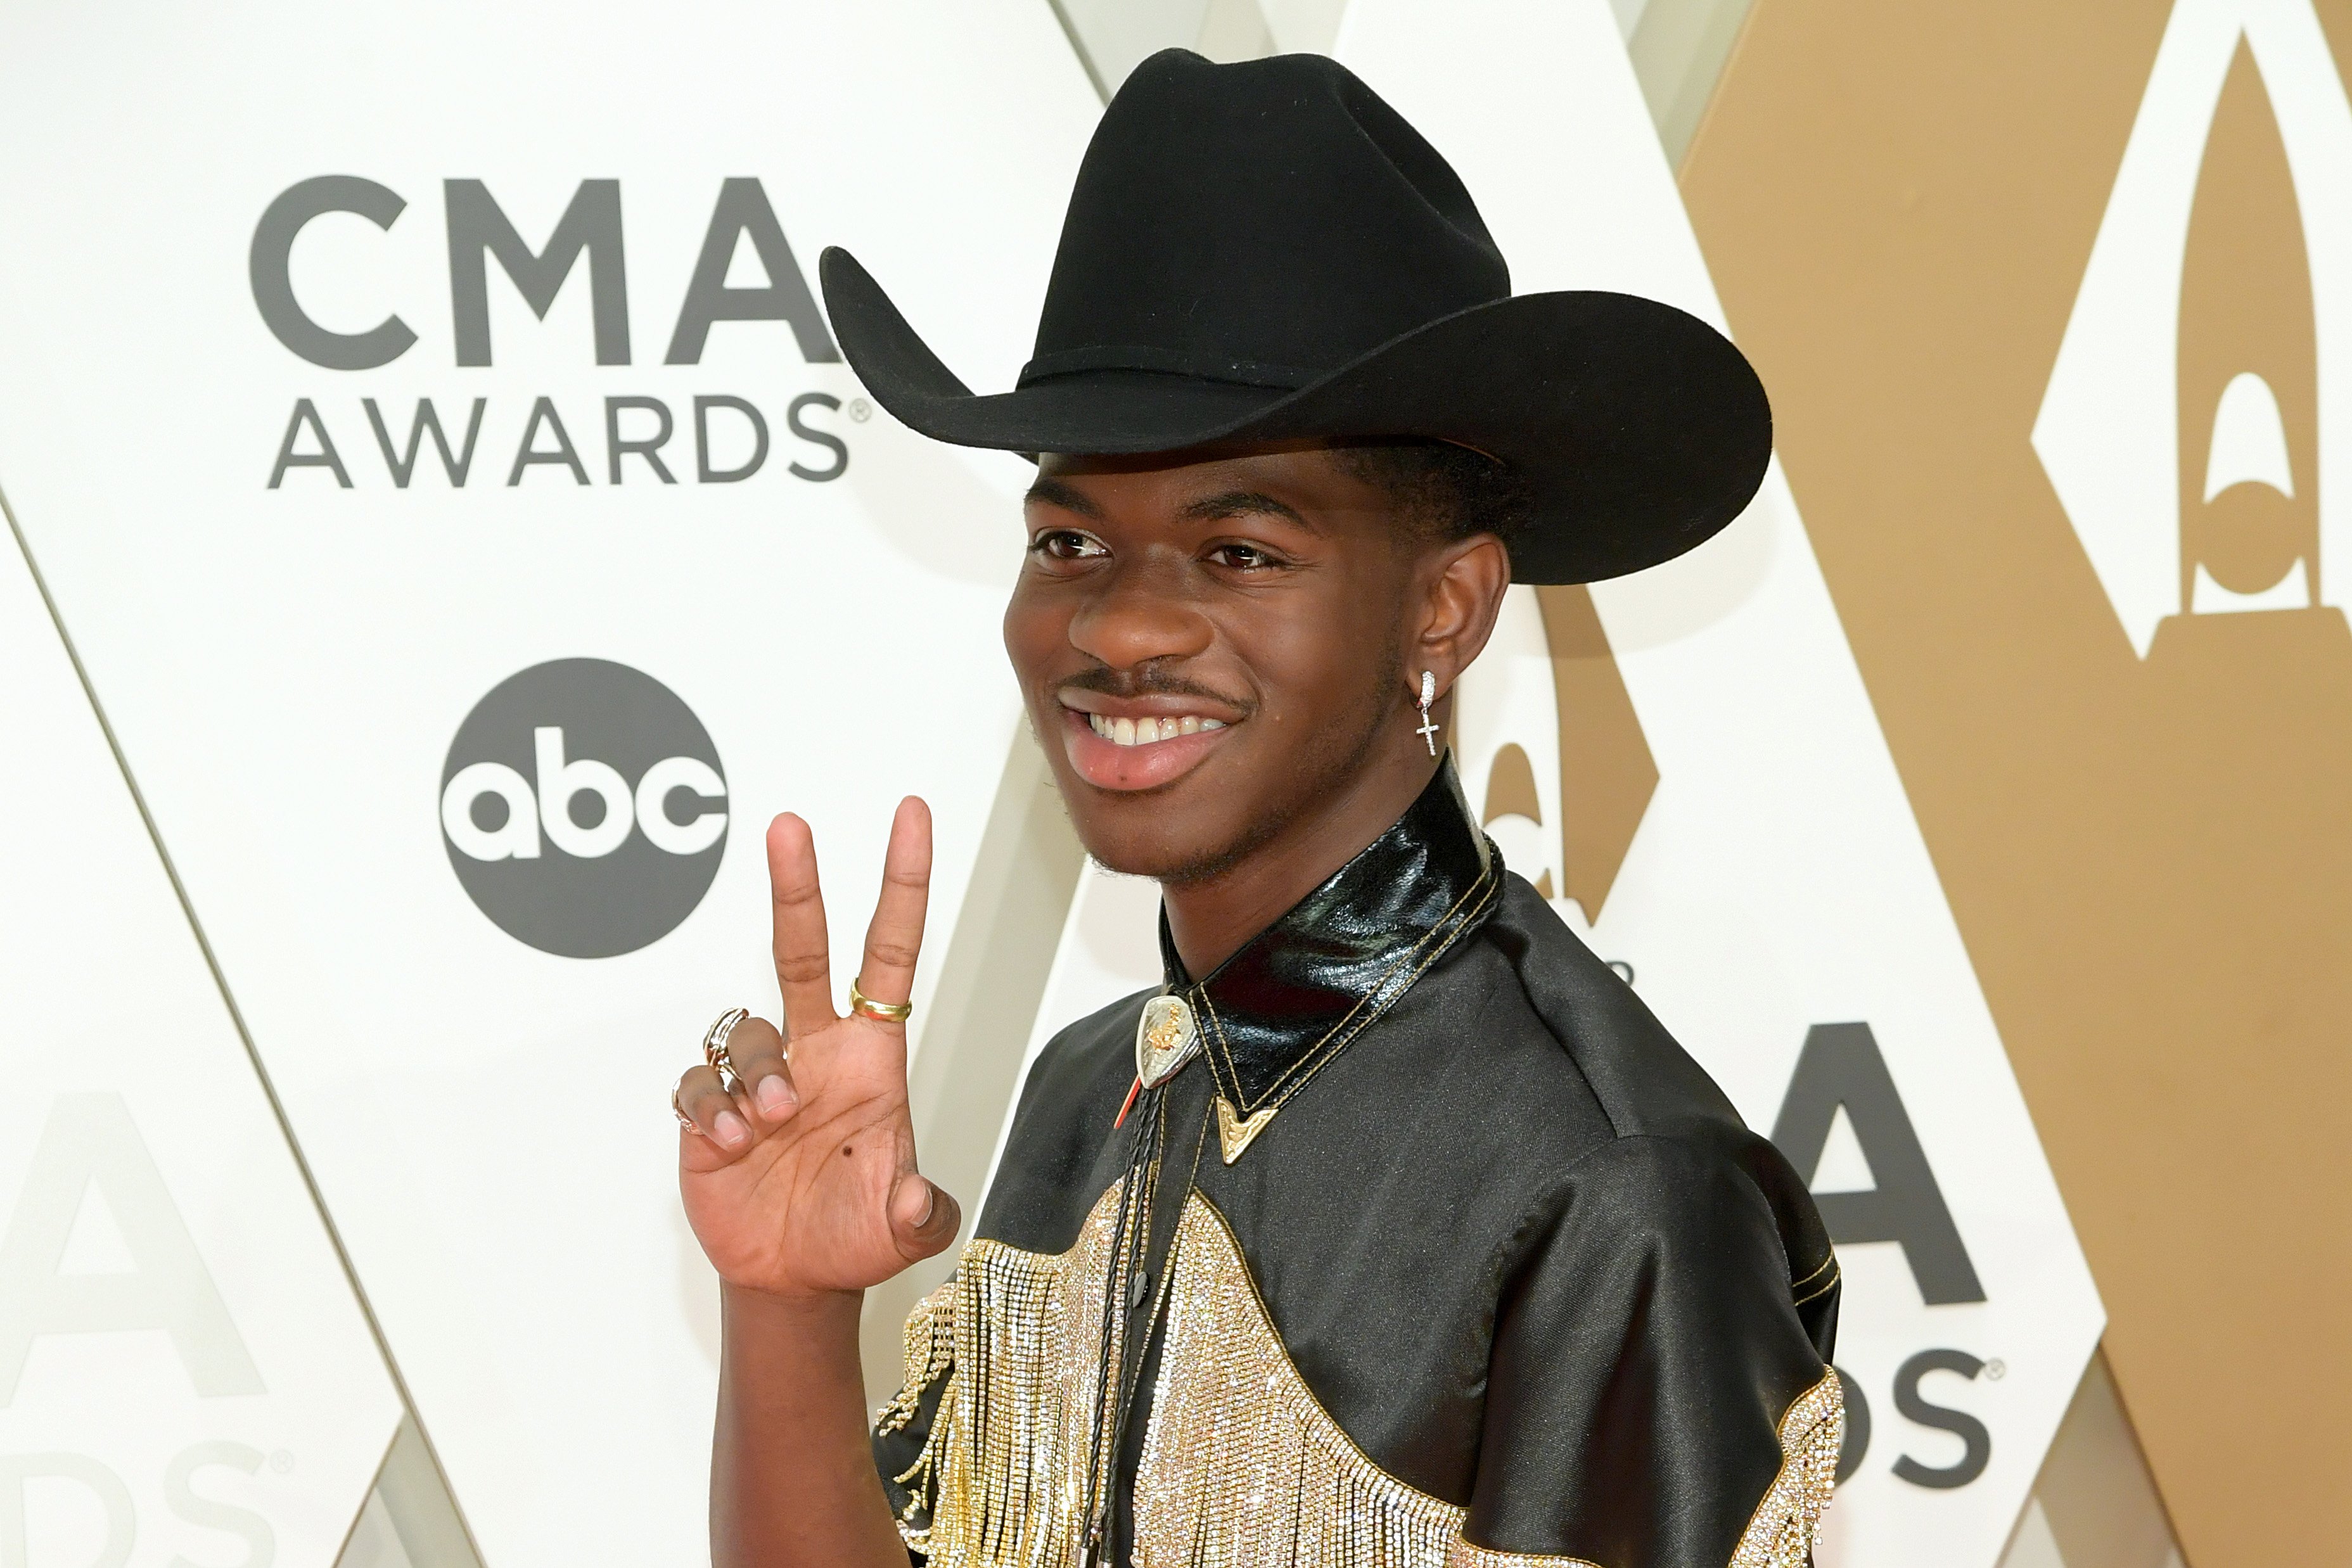 Lil Nas X at the 53rd annual CMA Awards on Nov. 13, 2019 in Tennessee | Photo: Getty Images